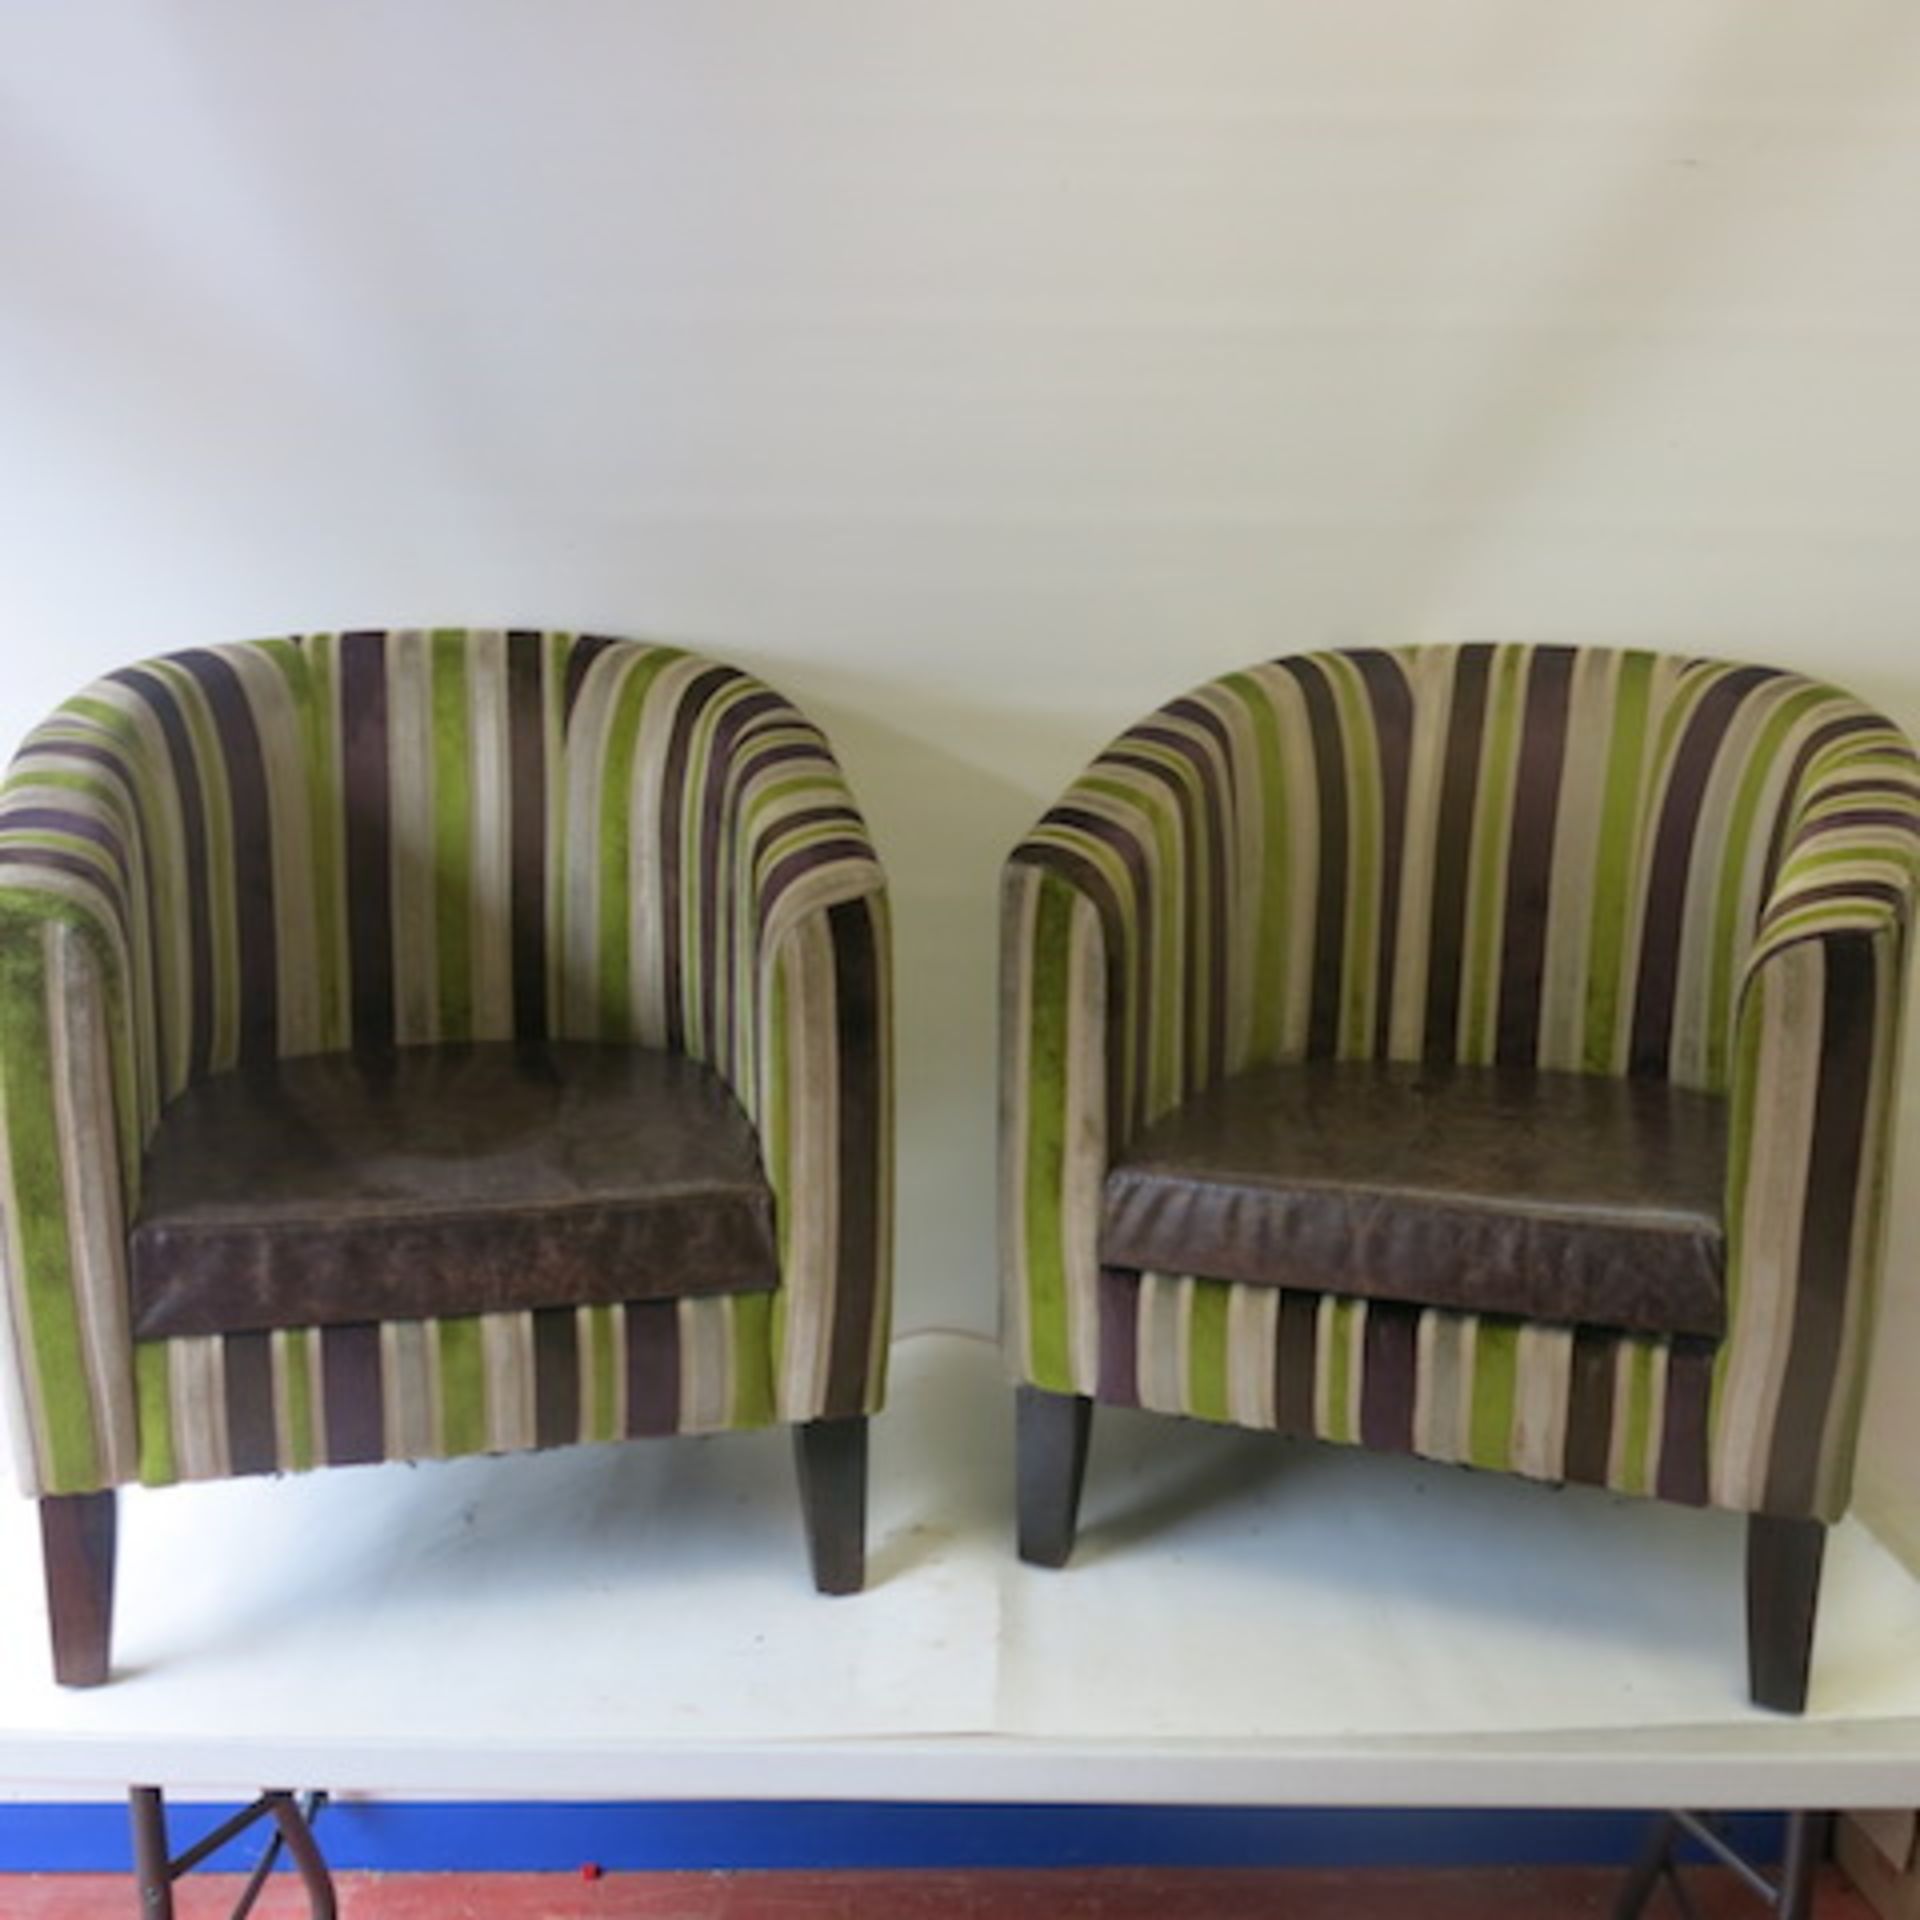 2 x Matching Crushed Velour Tub Chairs with Faux Leather Seat, in Striped Lime/Purple & Beige